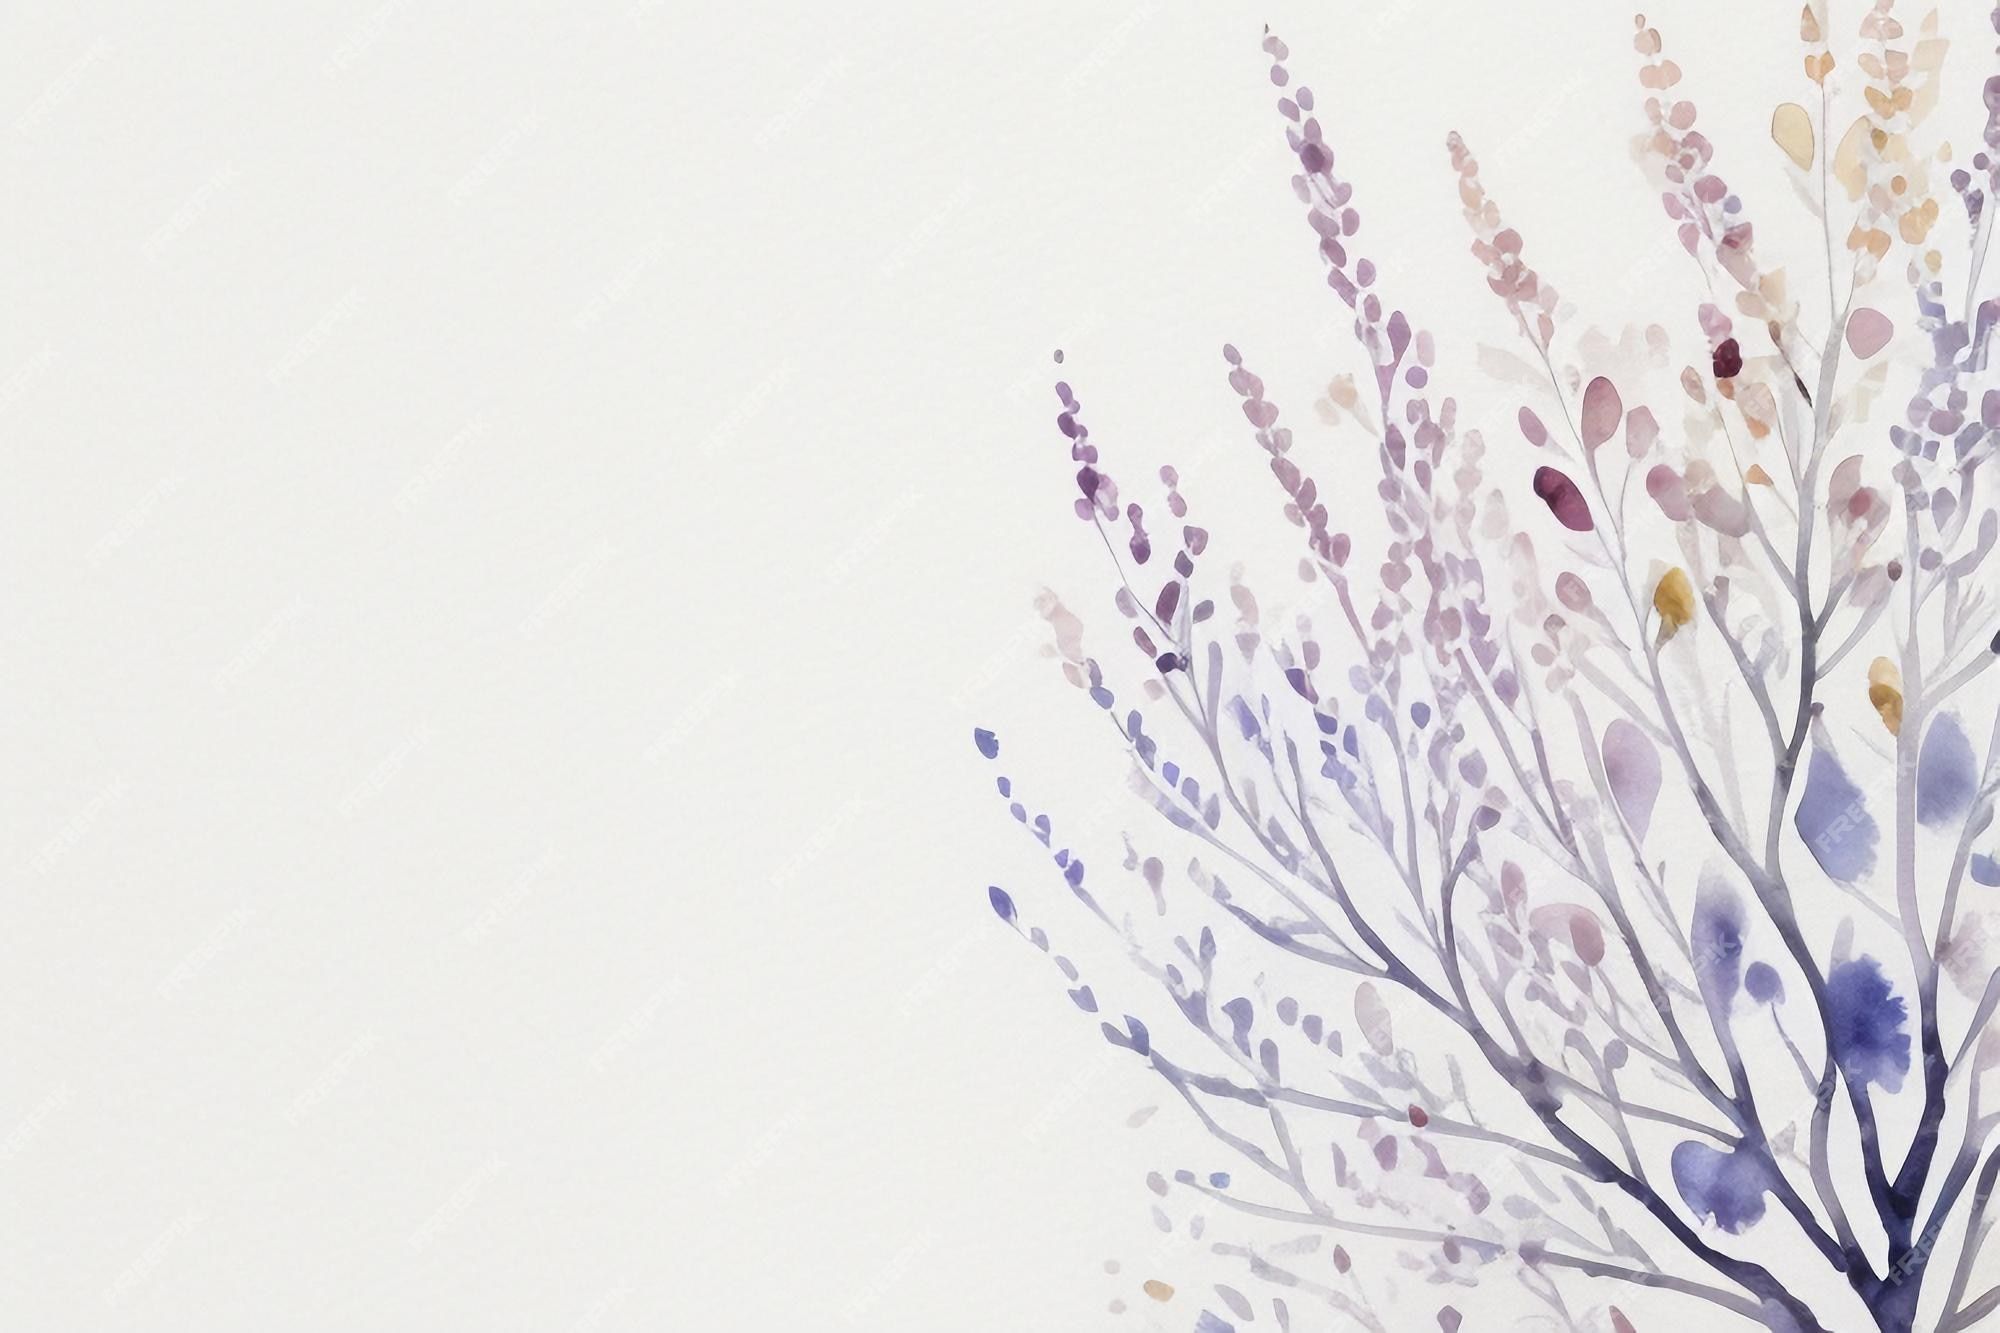 A watercolor painting of a tree with purple leaves - 